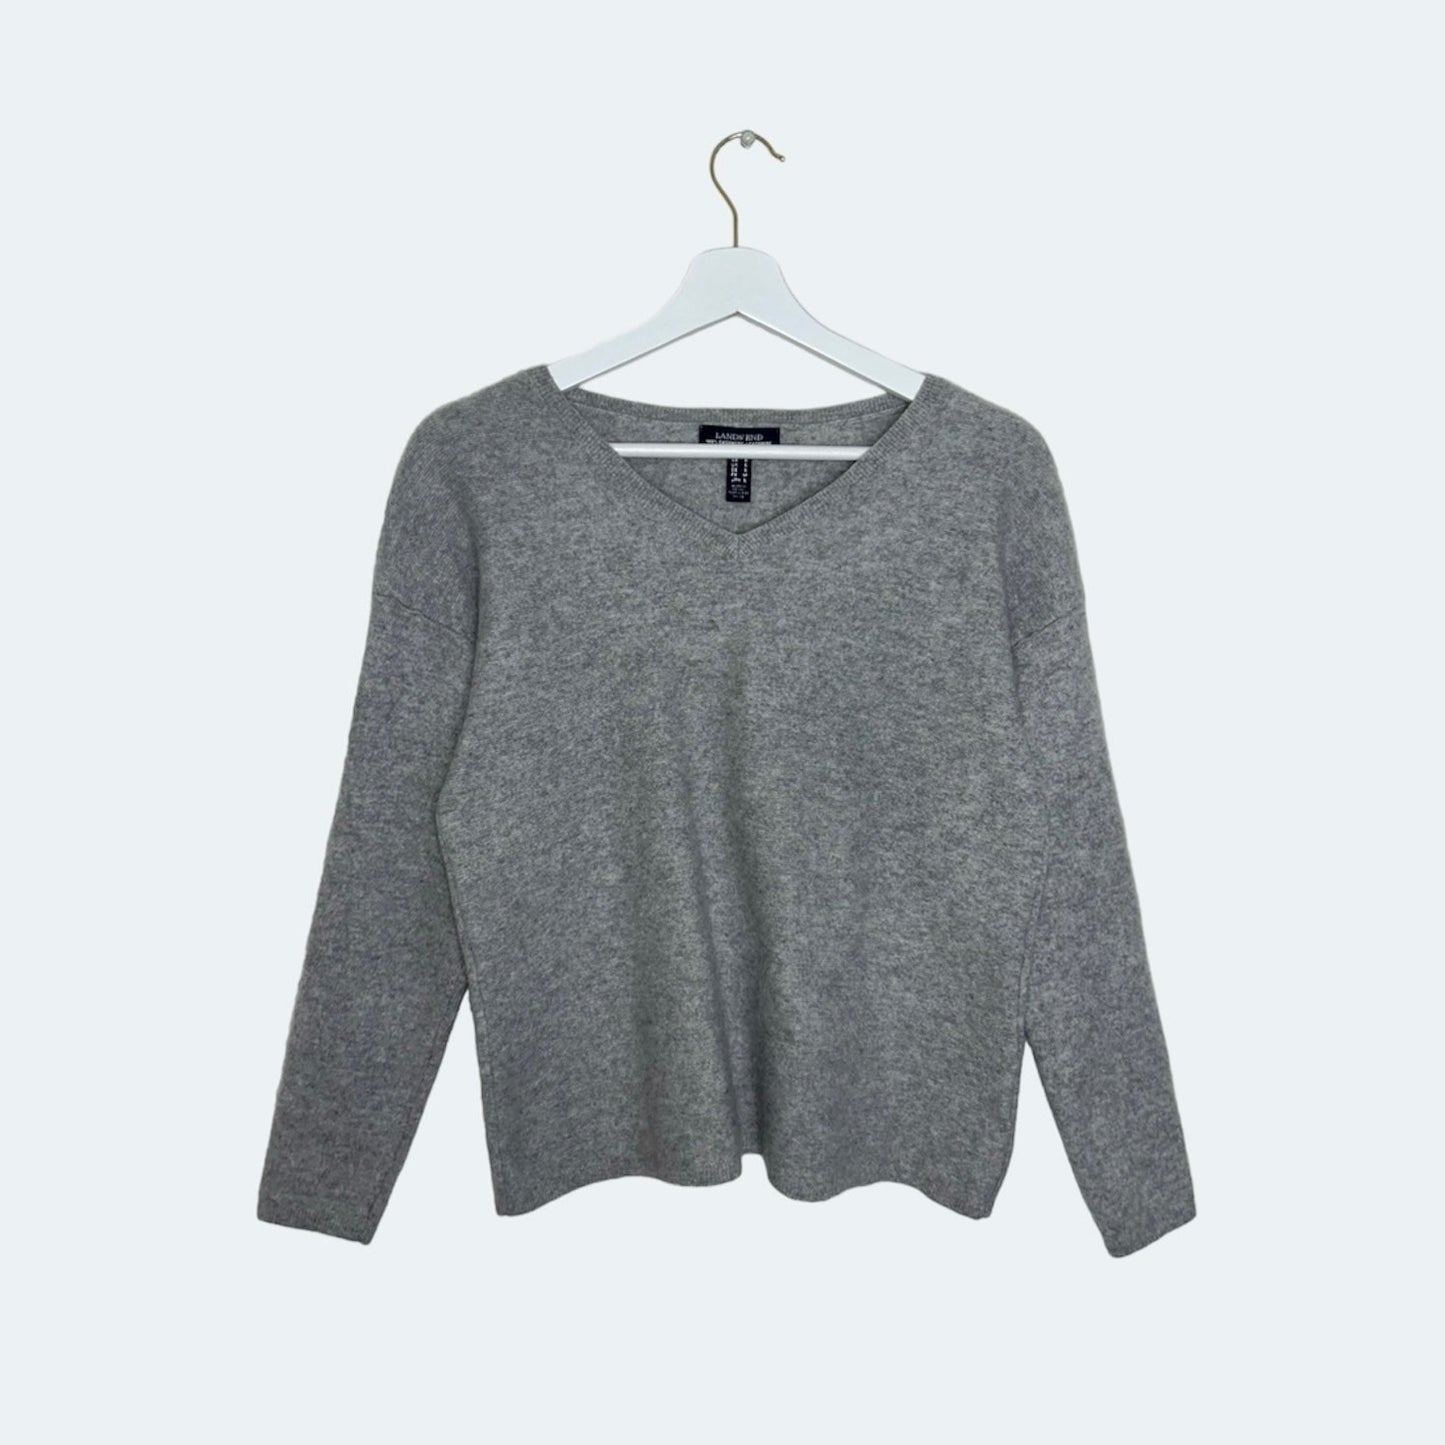 grey knit jumper shown on a white background